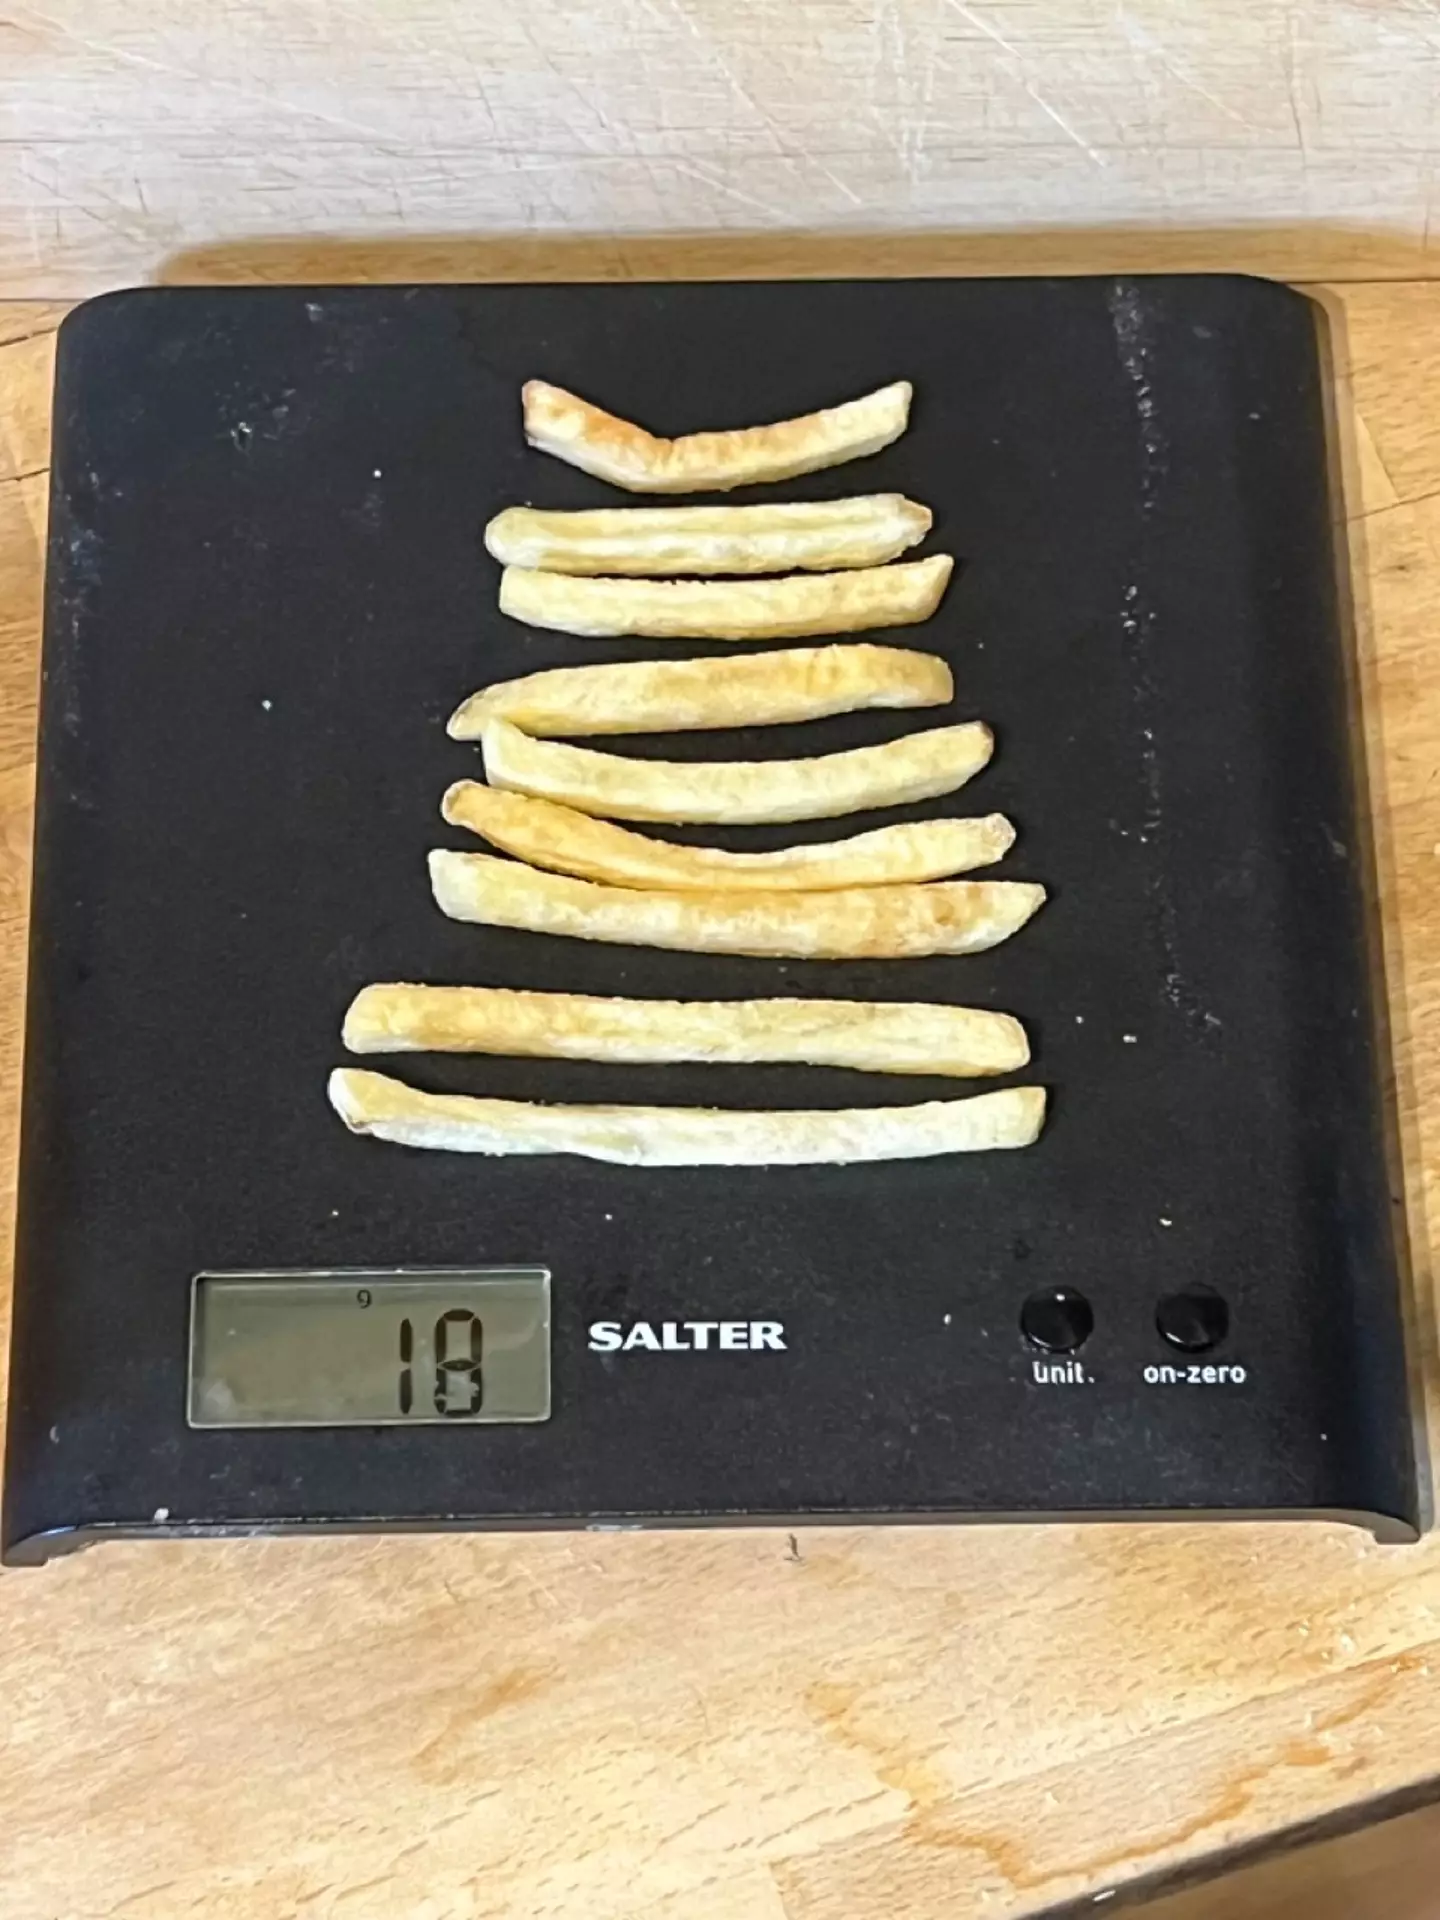 "Here's what 18g of fries looks like."